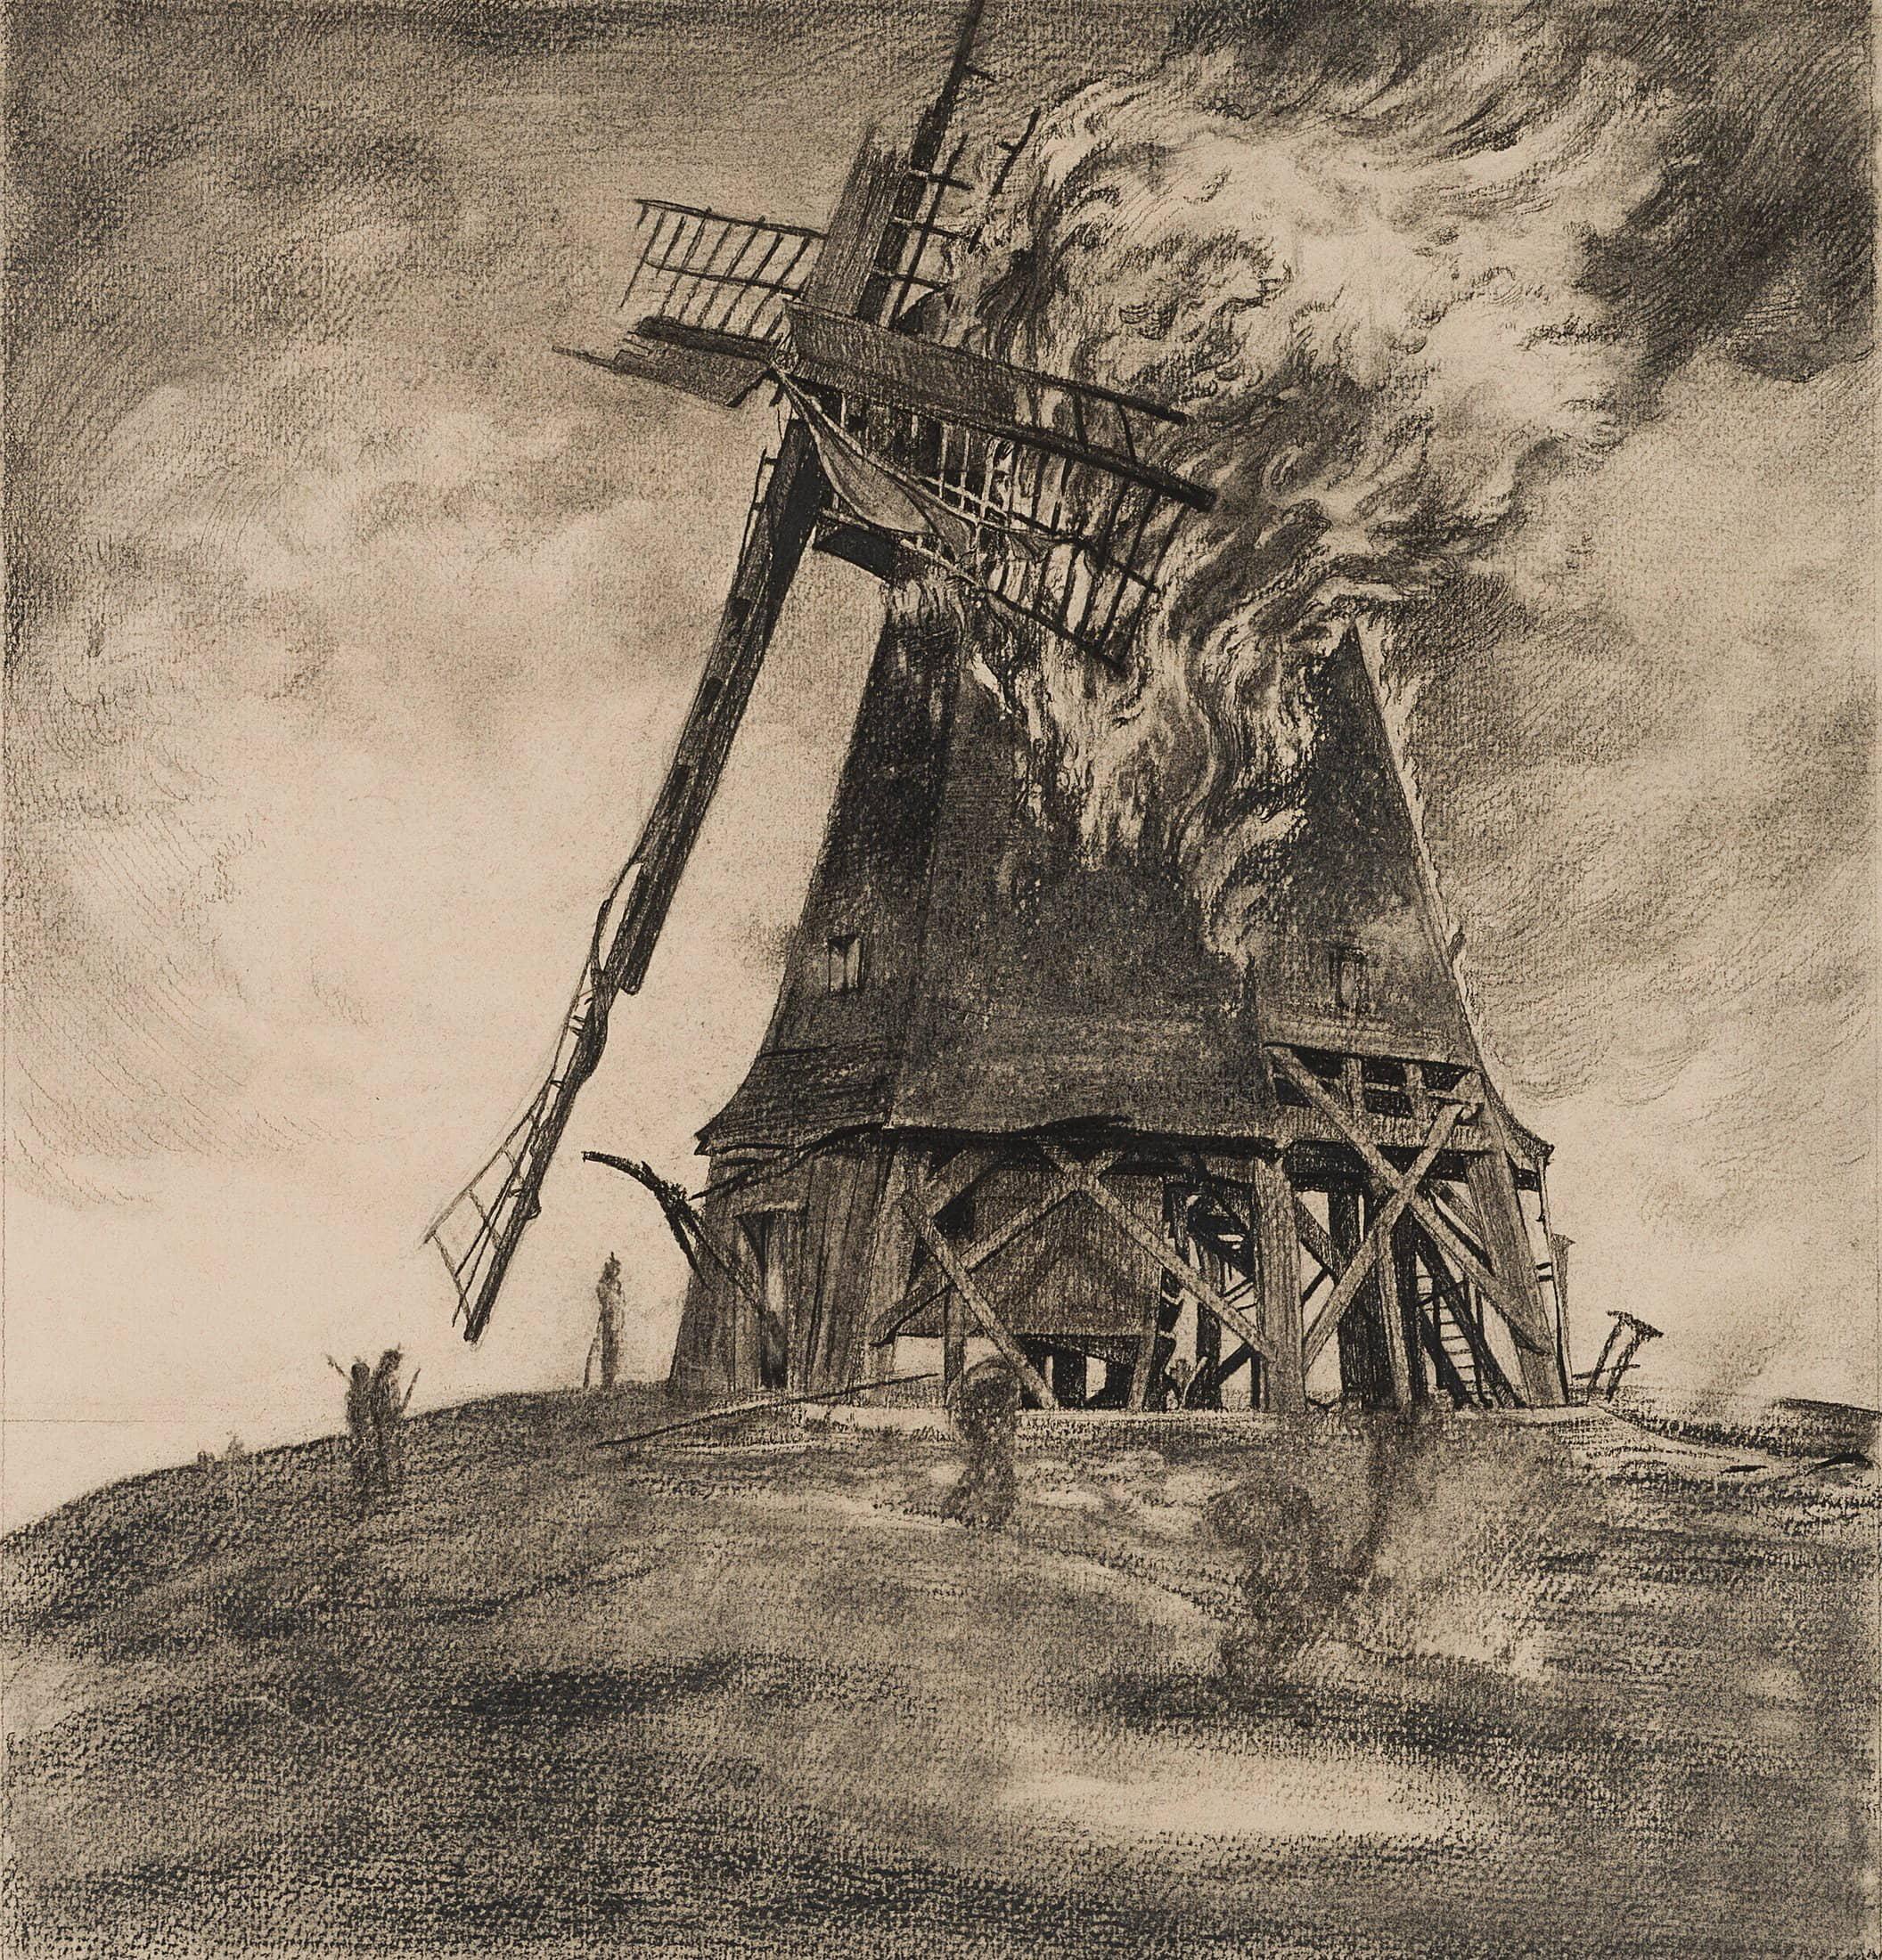 Carl August Walther Landscape Art - The mill fire